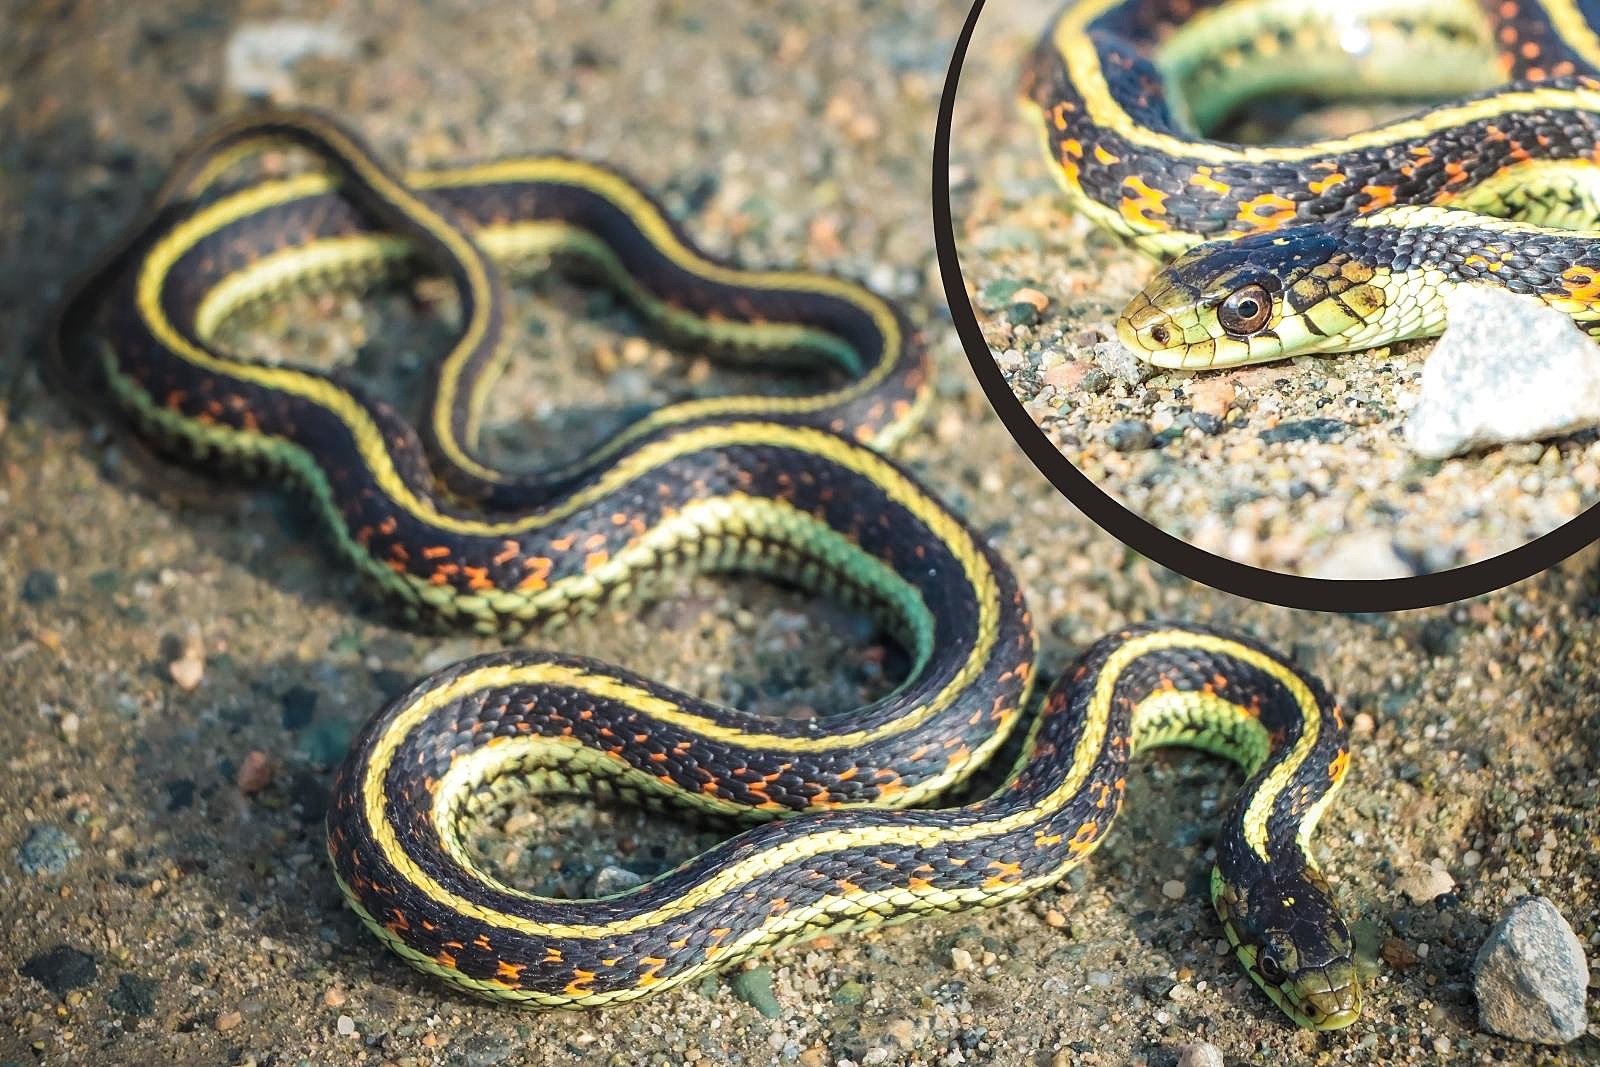 A black and yellow striped common garter snake; an inset shows the close up of one's face.